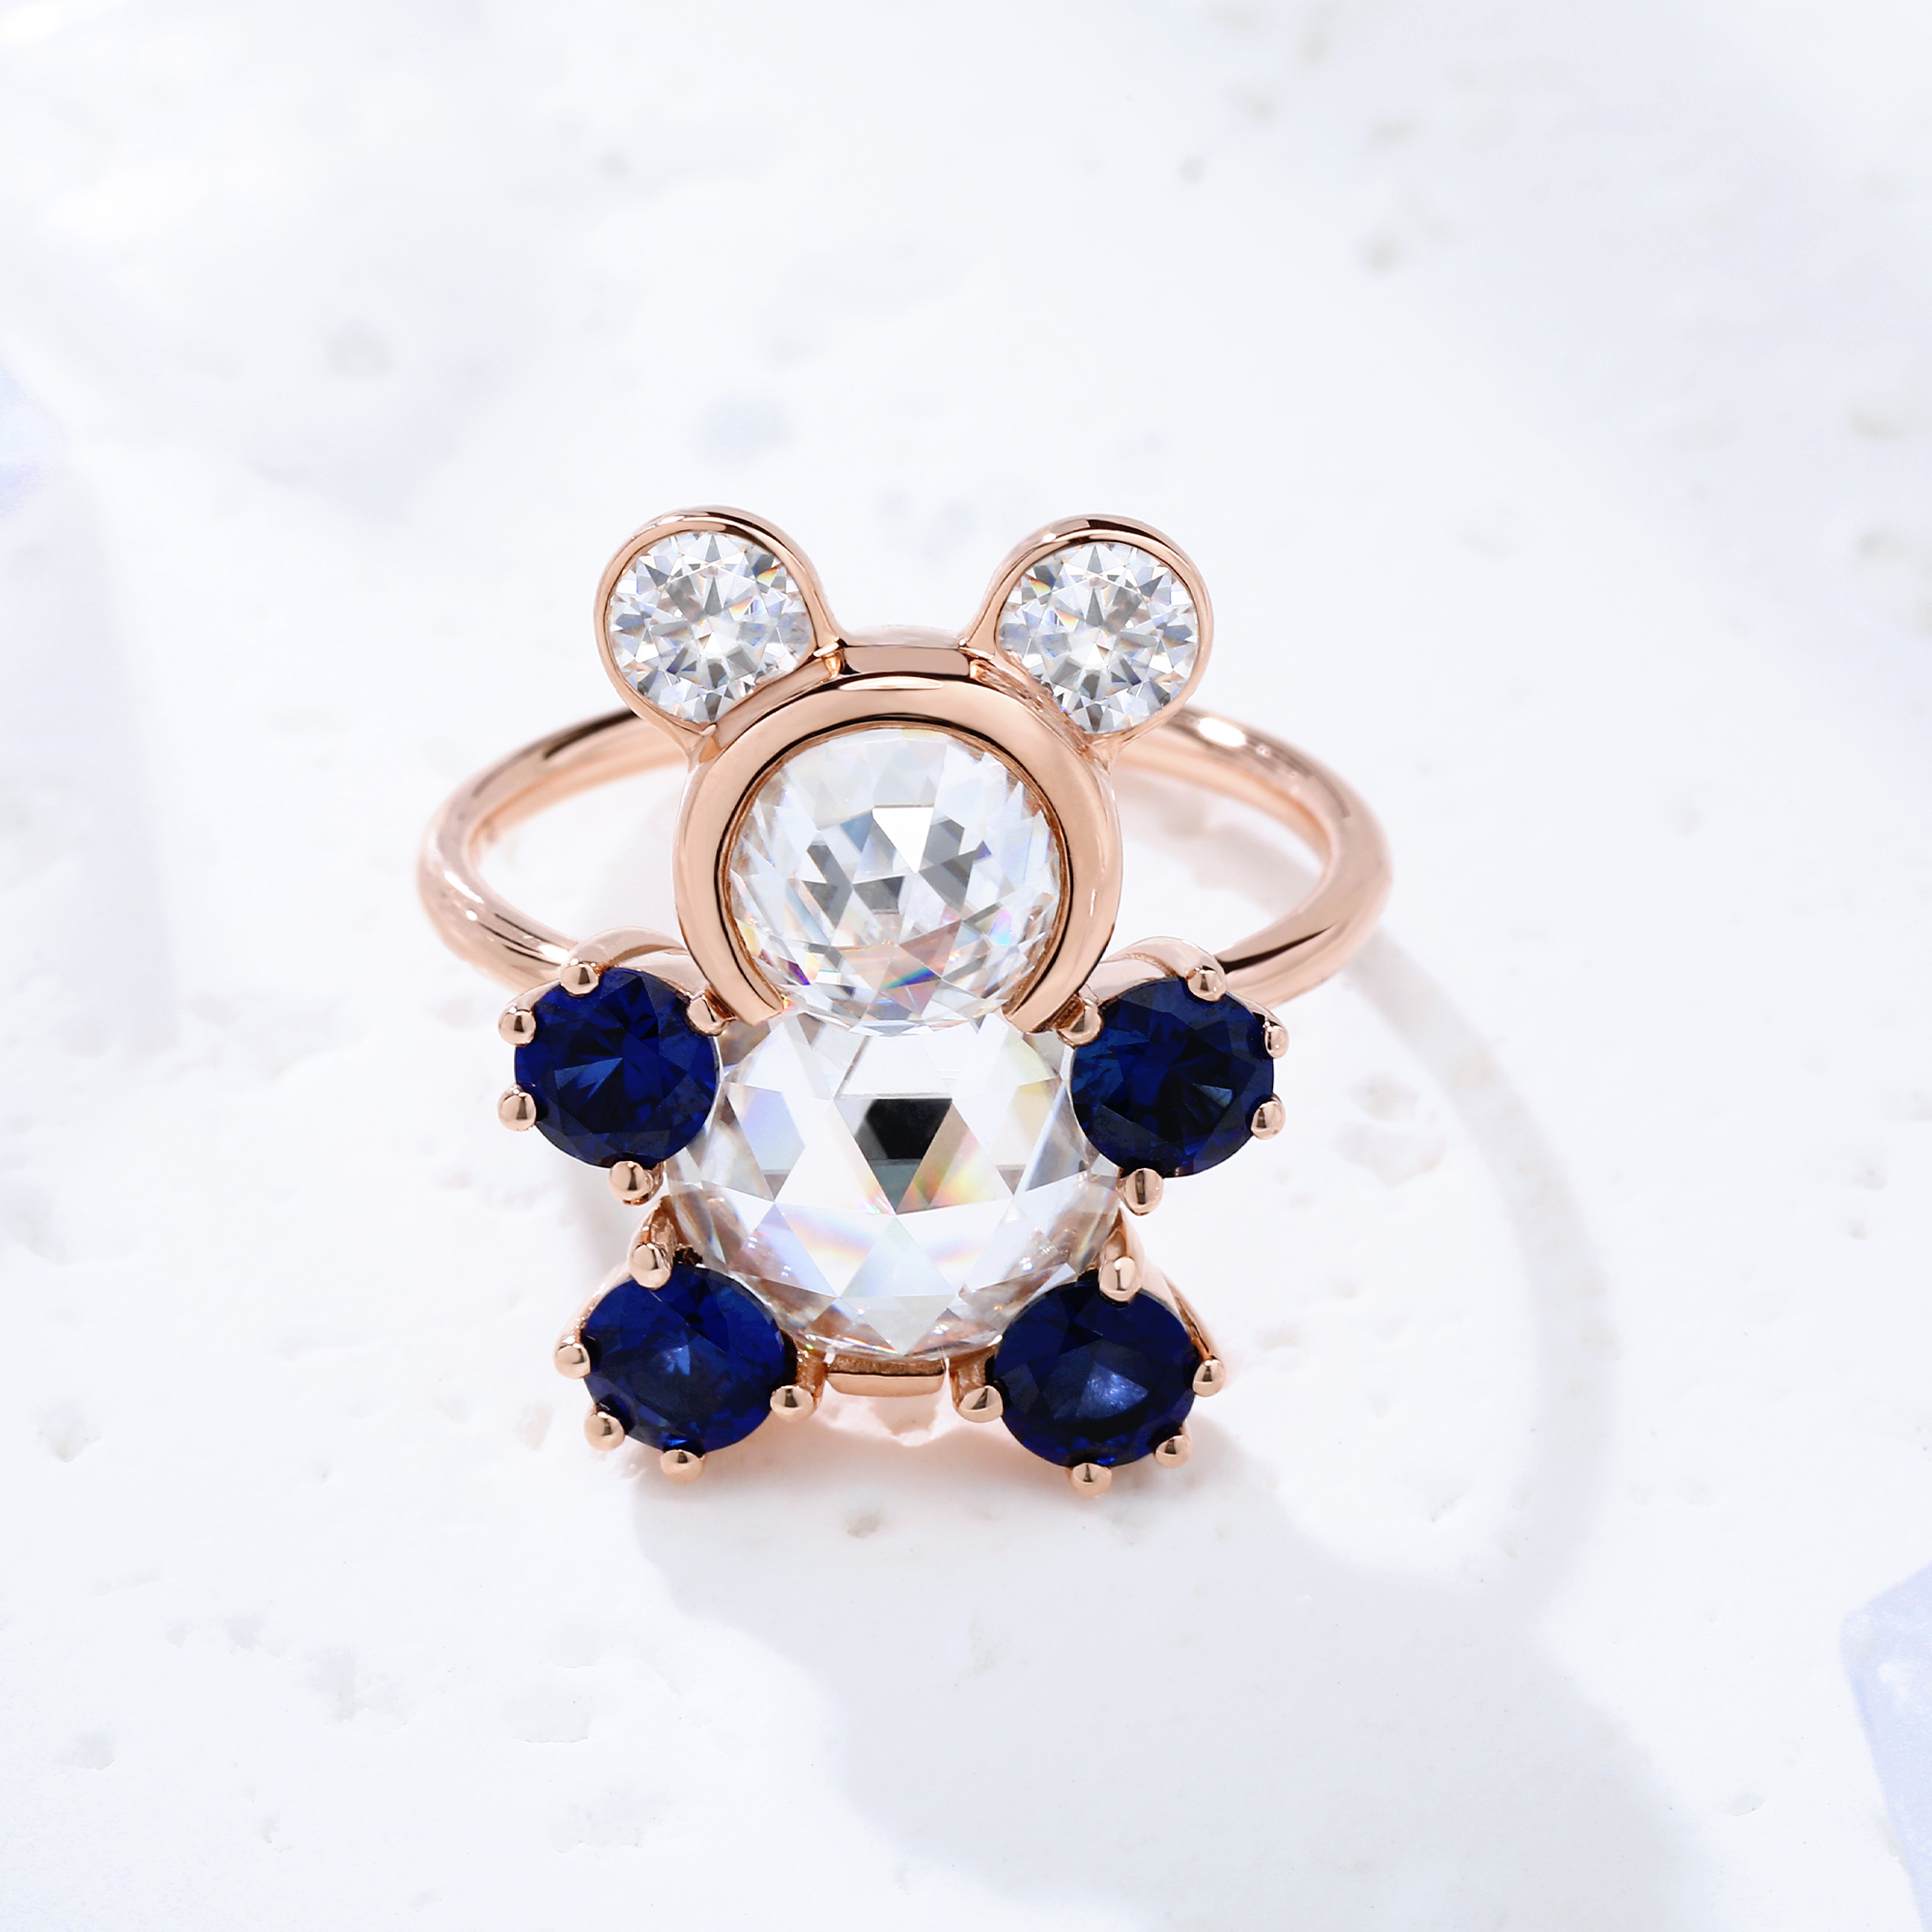 18K Rose Gold Teddy Bear Ring with Rose-Cut Moissanite and Cultivated Blue Sapphires | Unique Fine Jewelry